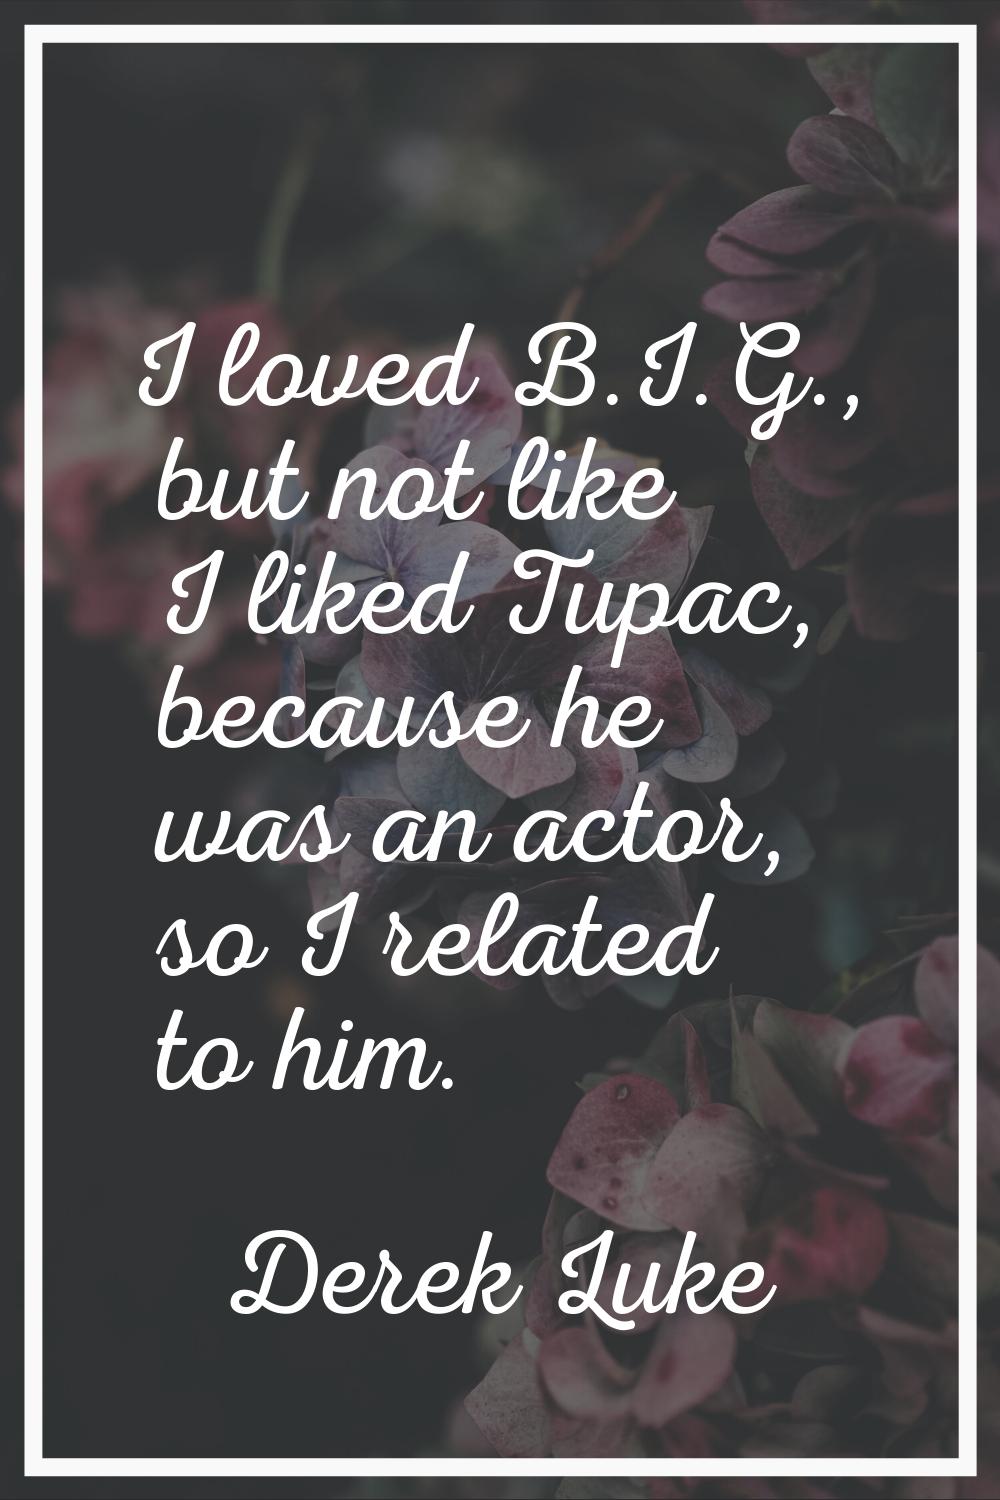 I loved B.I.G., but not like I liked Tupac, because he was an actor, so I related to him.